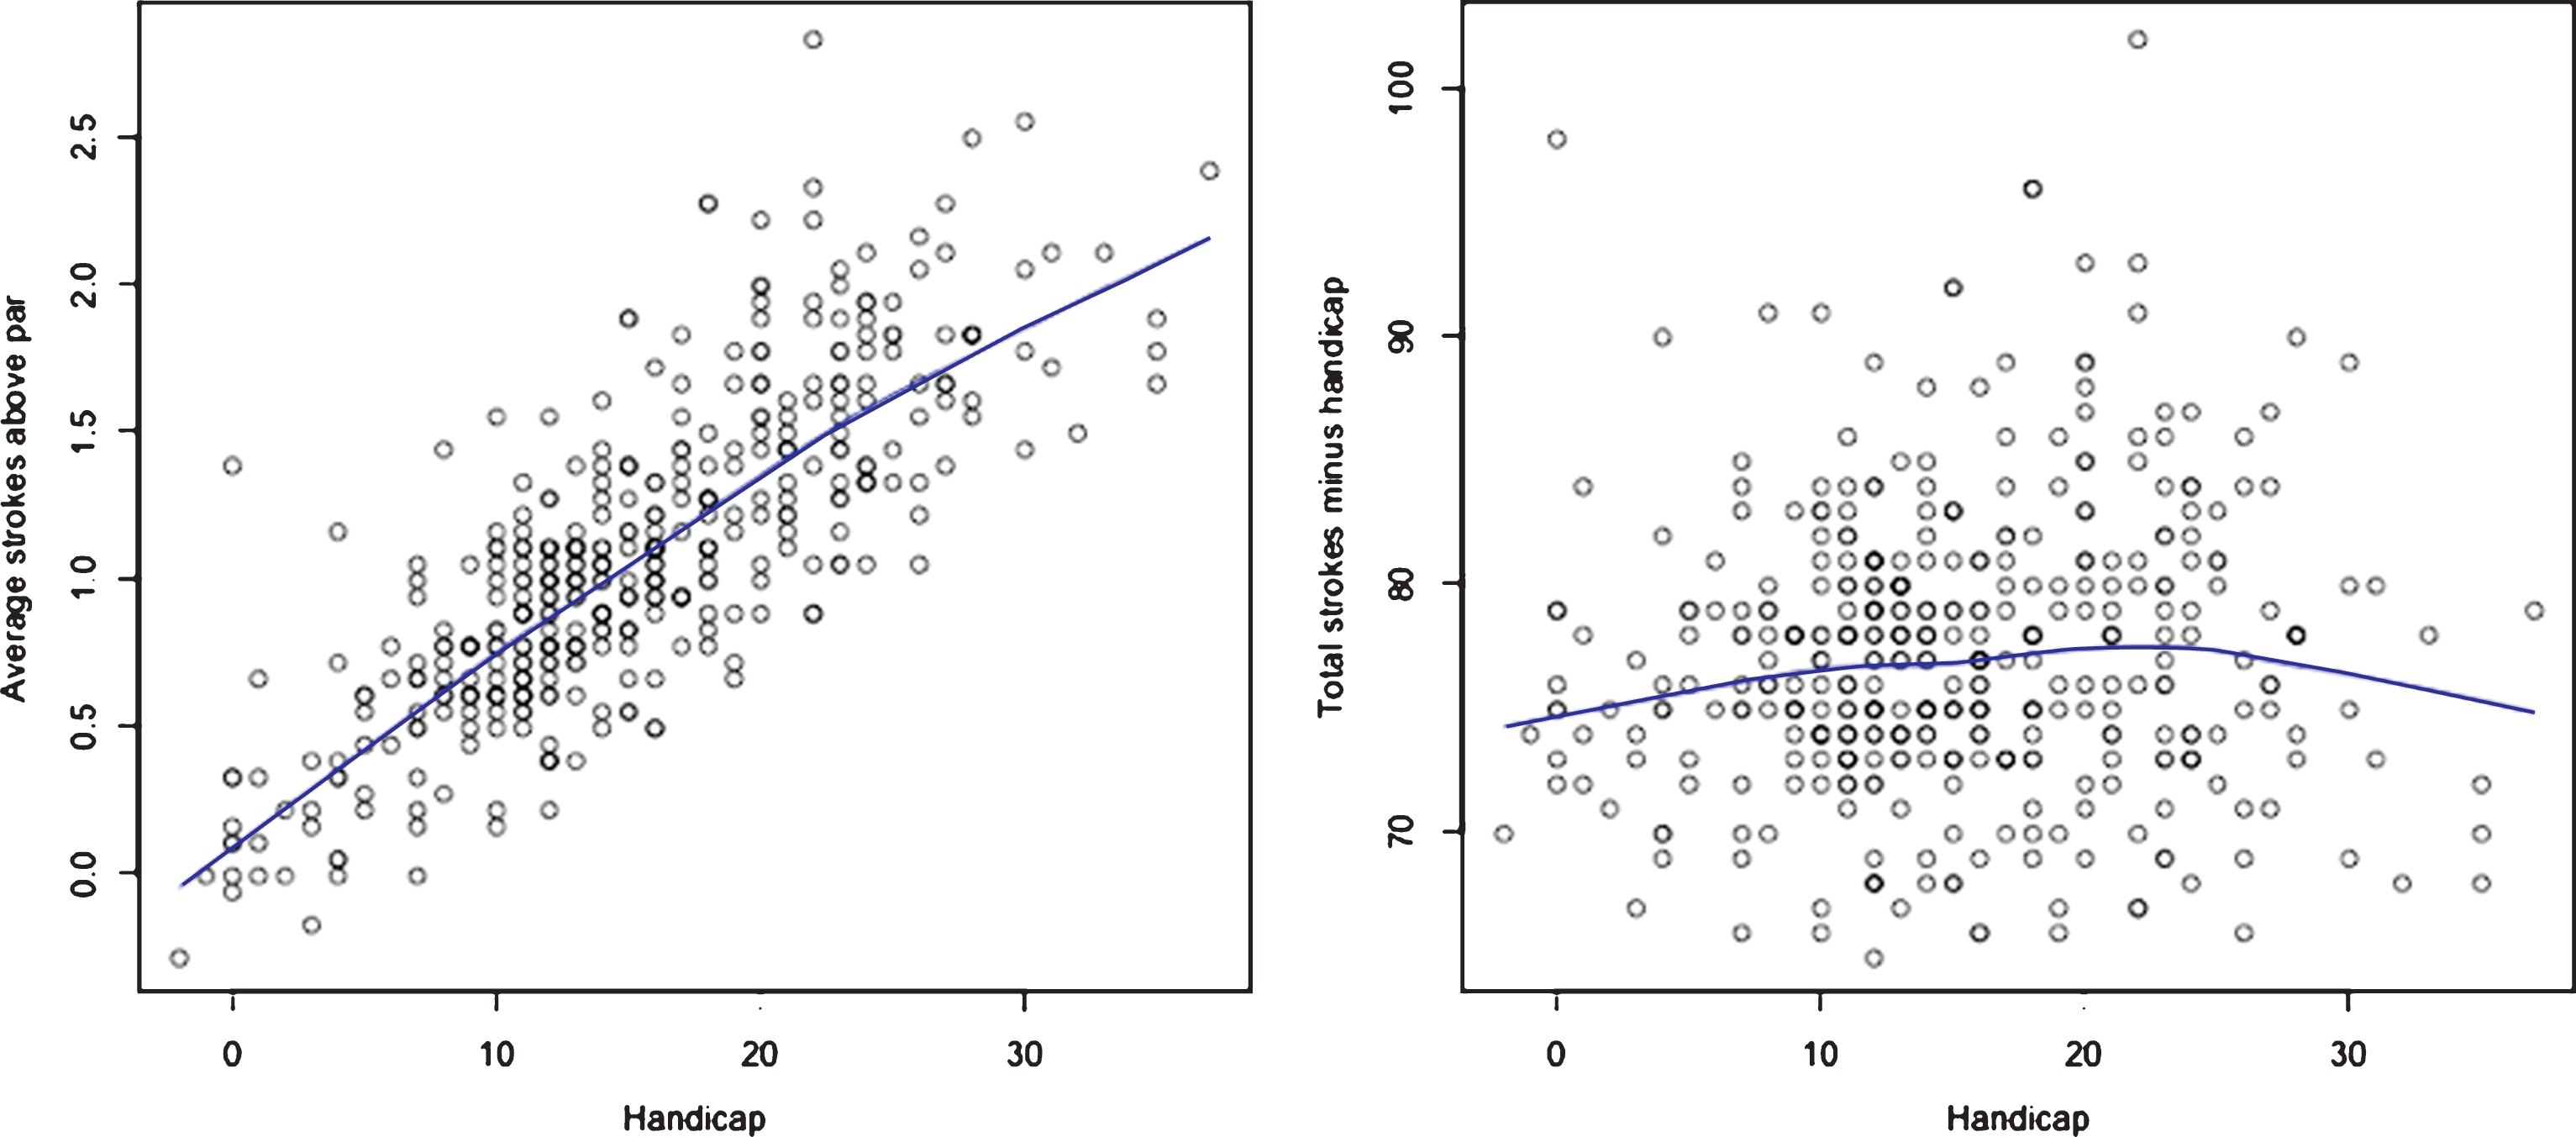 Scores as a function of handicap. The left hand graph shows the strokes above par averaged over holes within a round as function of handicap and the right hand graph shows the net round score. The solid lines represent Lowess smoothing of the data as computed by R (R Core Development Team, 2008).